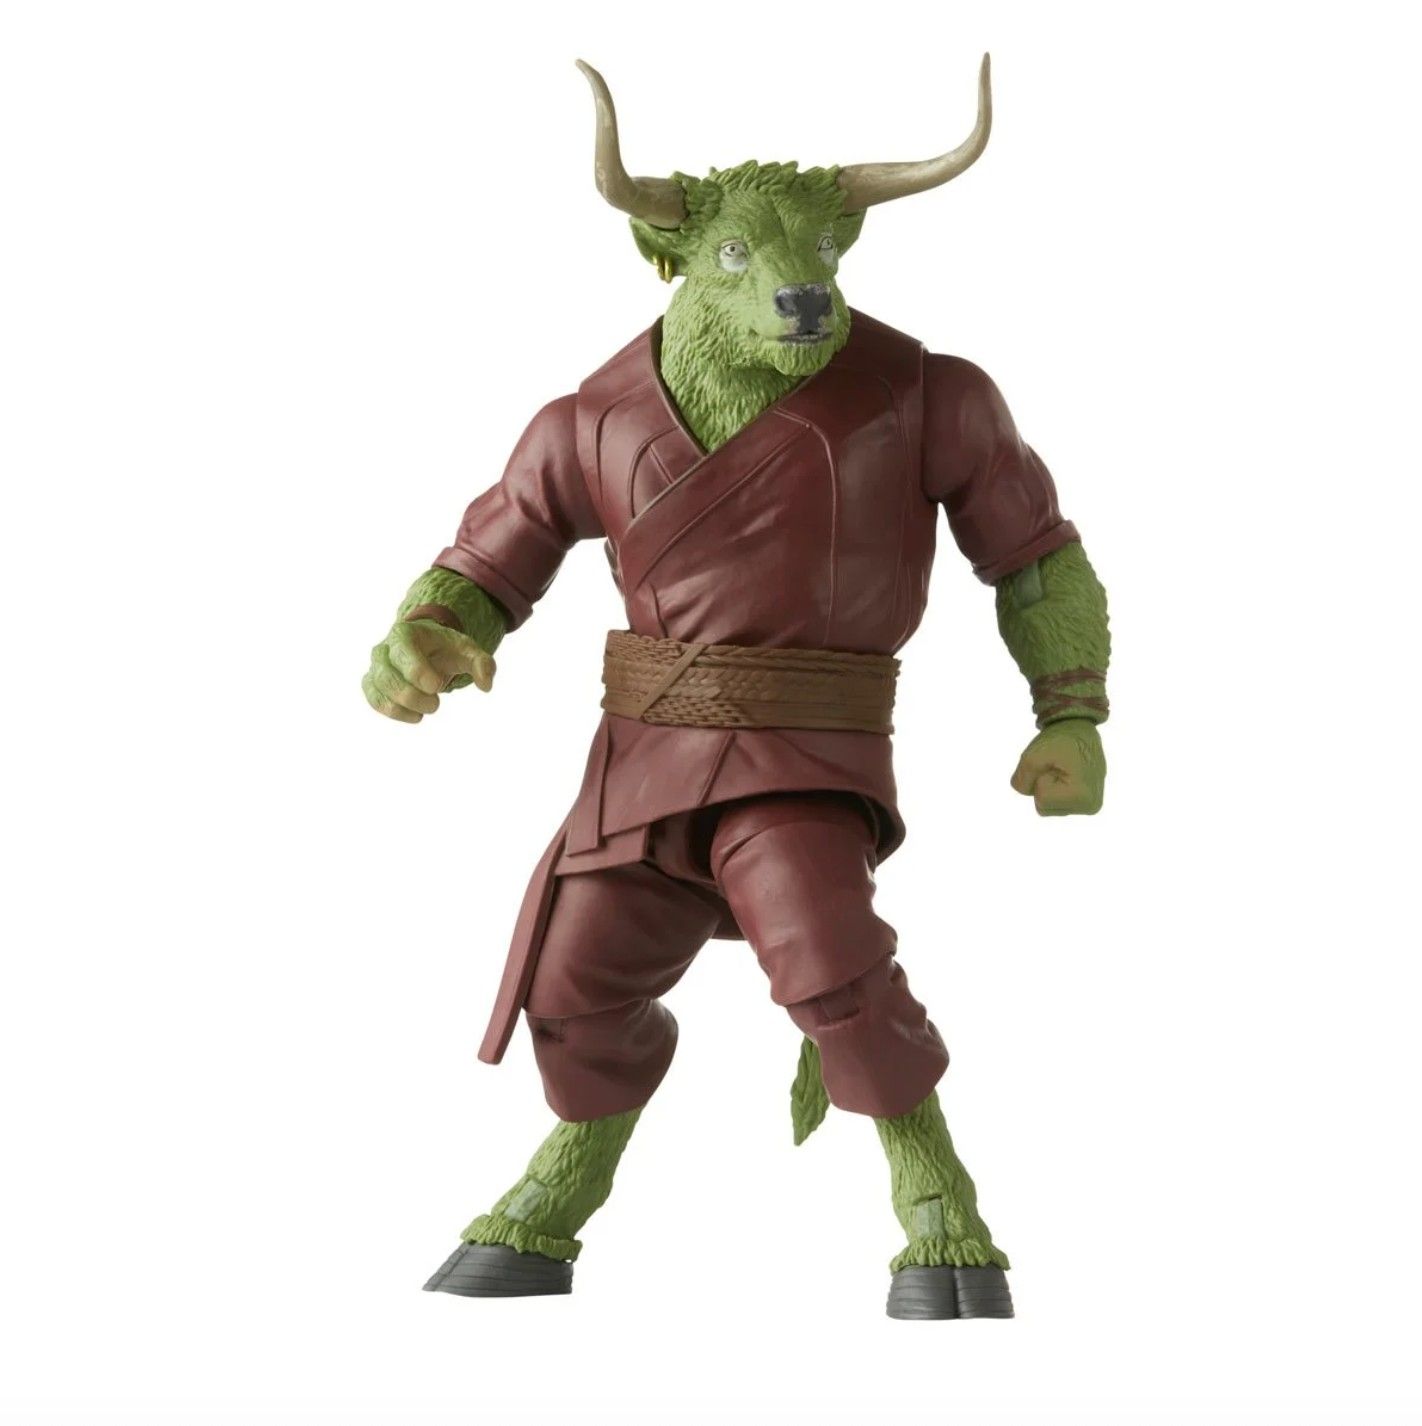 Doctor Stranges Minotaur Apprentice Revealed in Multiverse of Madness Toys